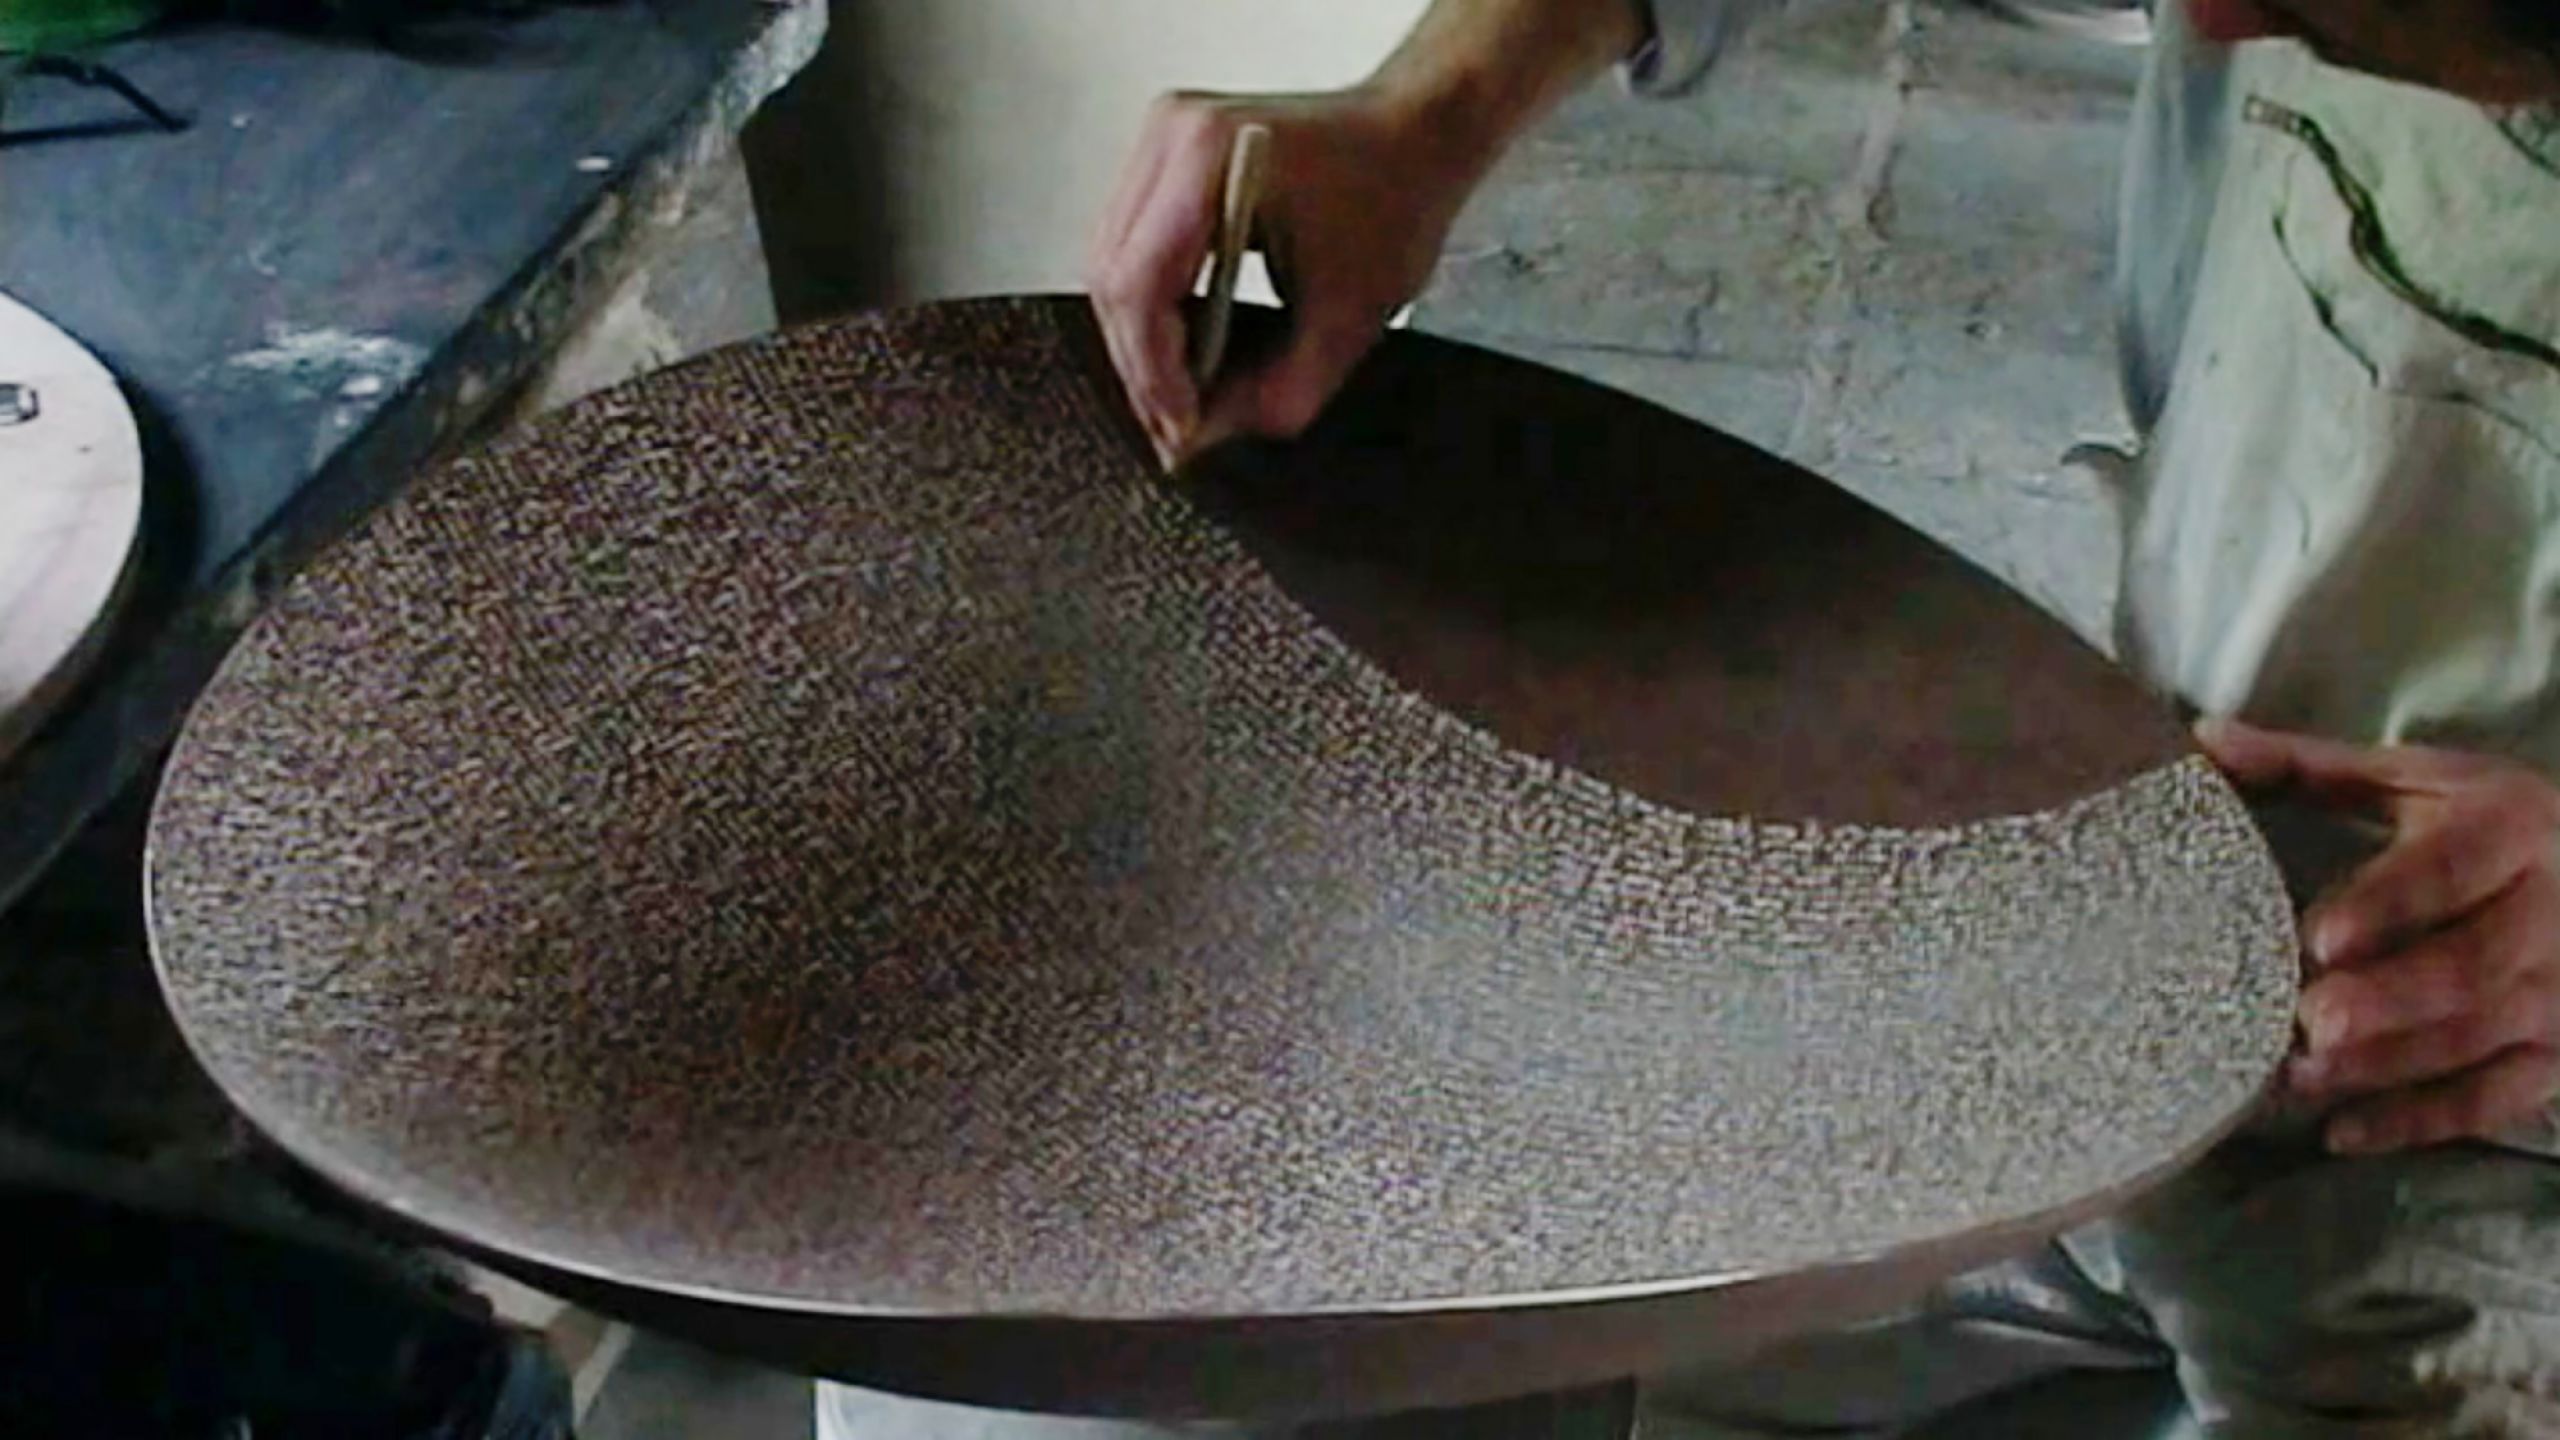 River of Words: The making of pots